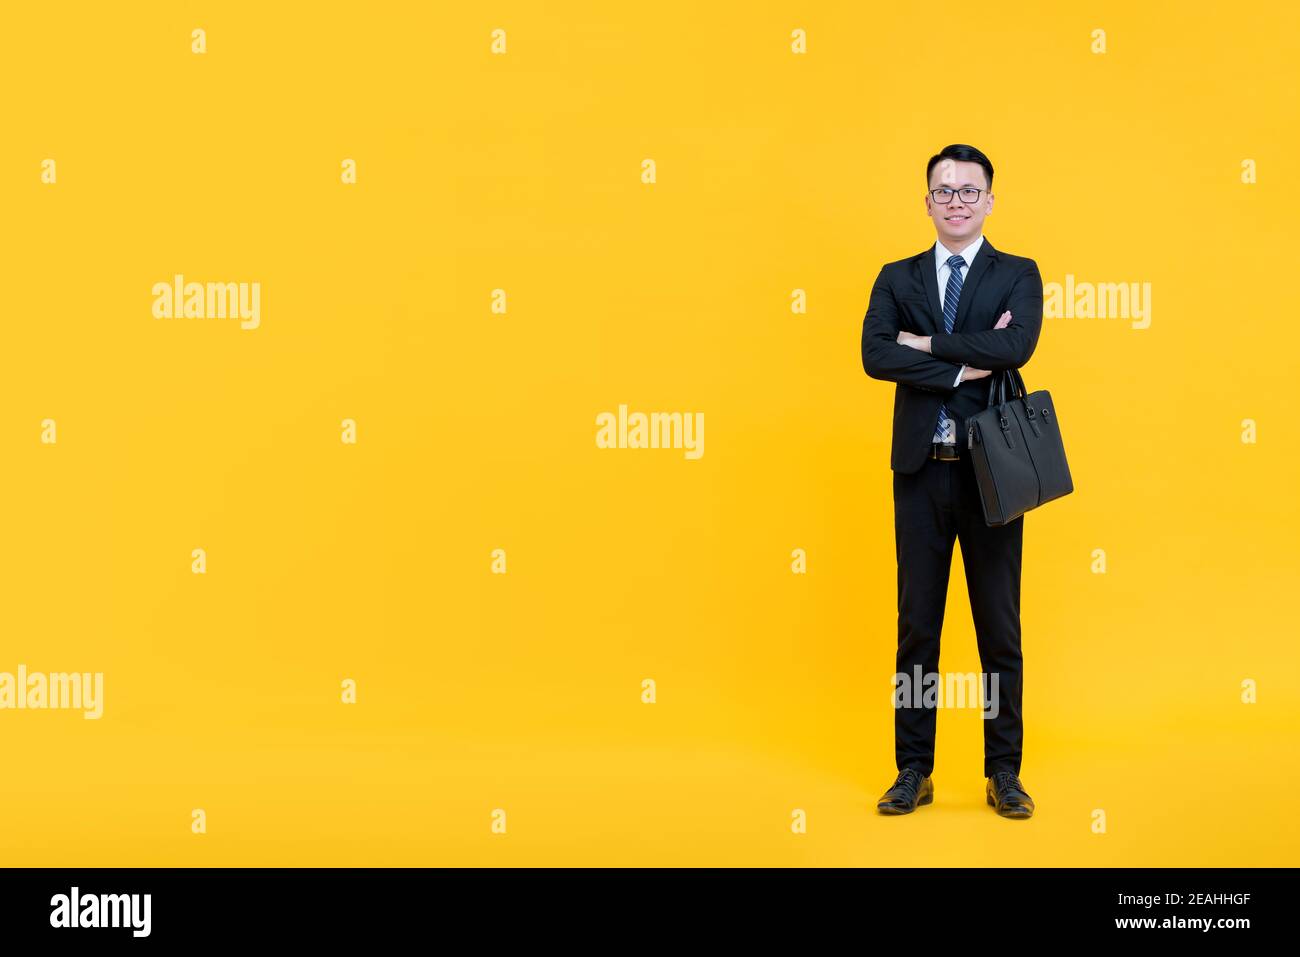 Asian businessman in formal business suit standing with arms crossed holding briefcase isolated on yellow background with copy space Stock Photo